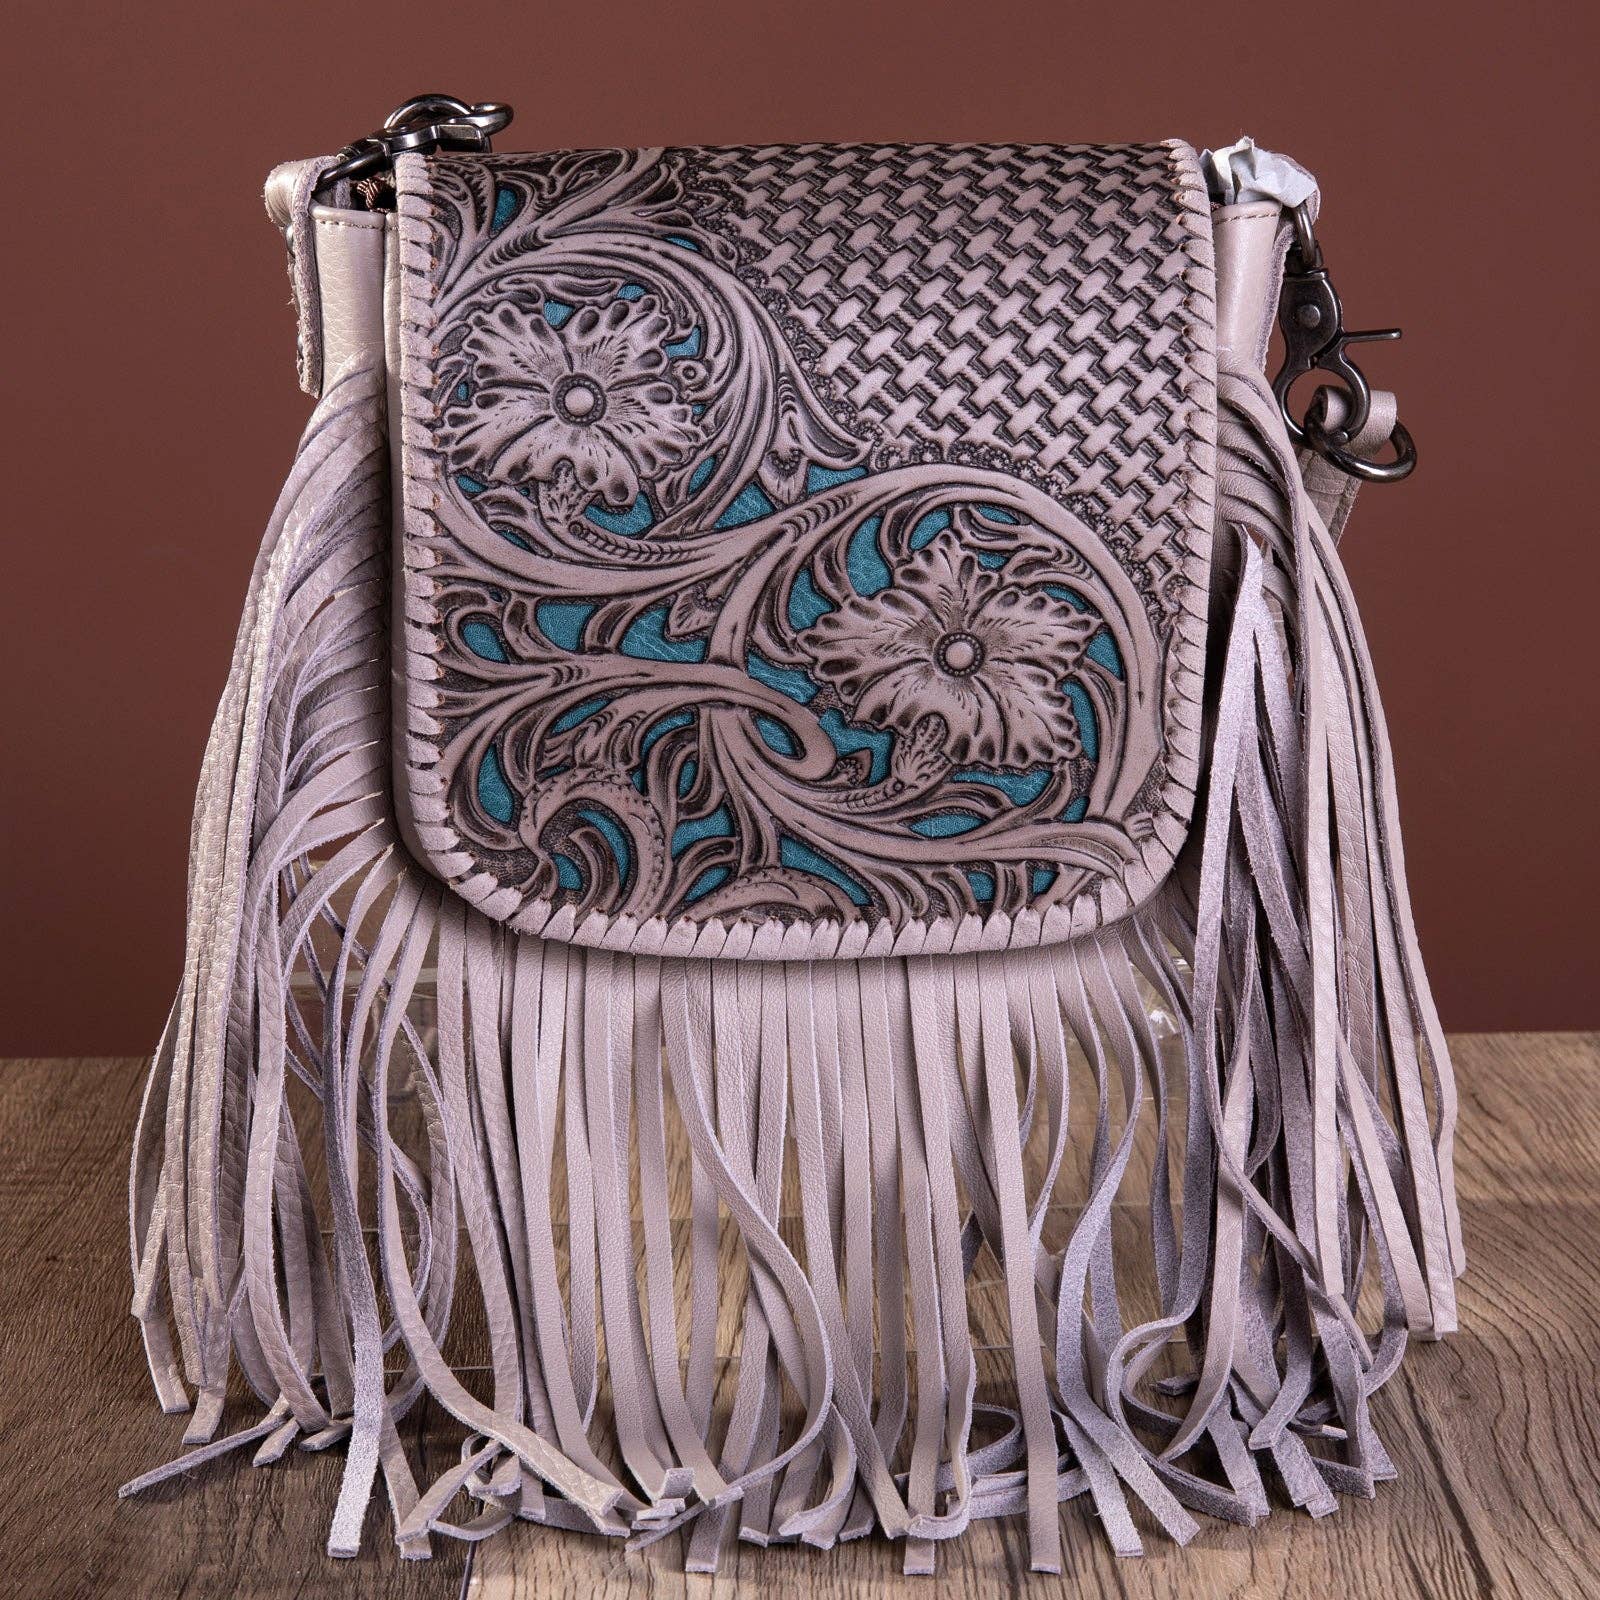 Buy wholesale Handmade Leather Bag with Unique Design and Decorative Fringes